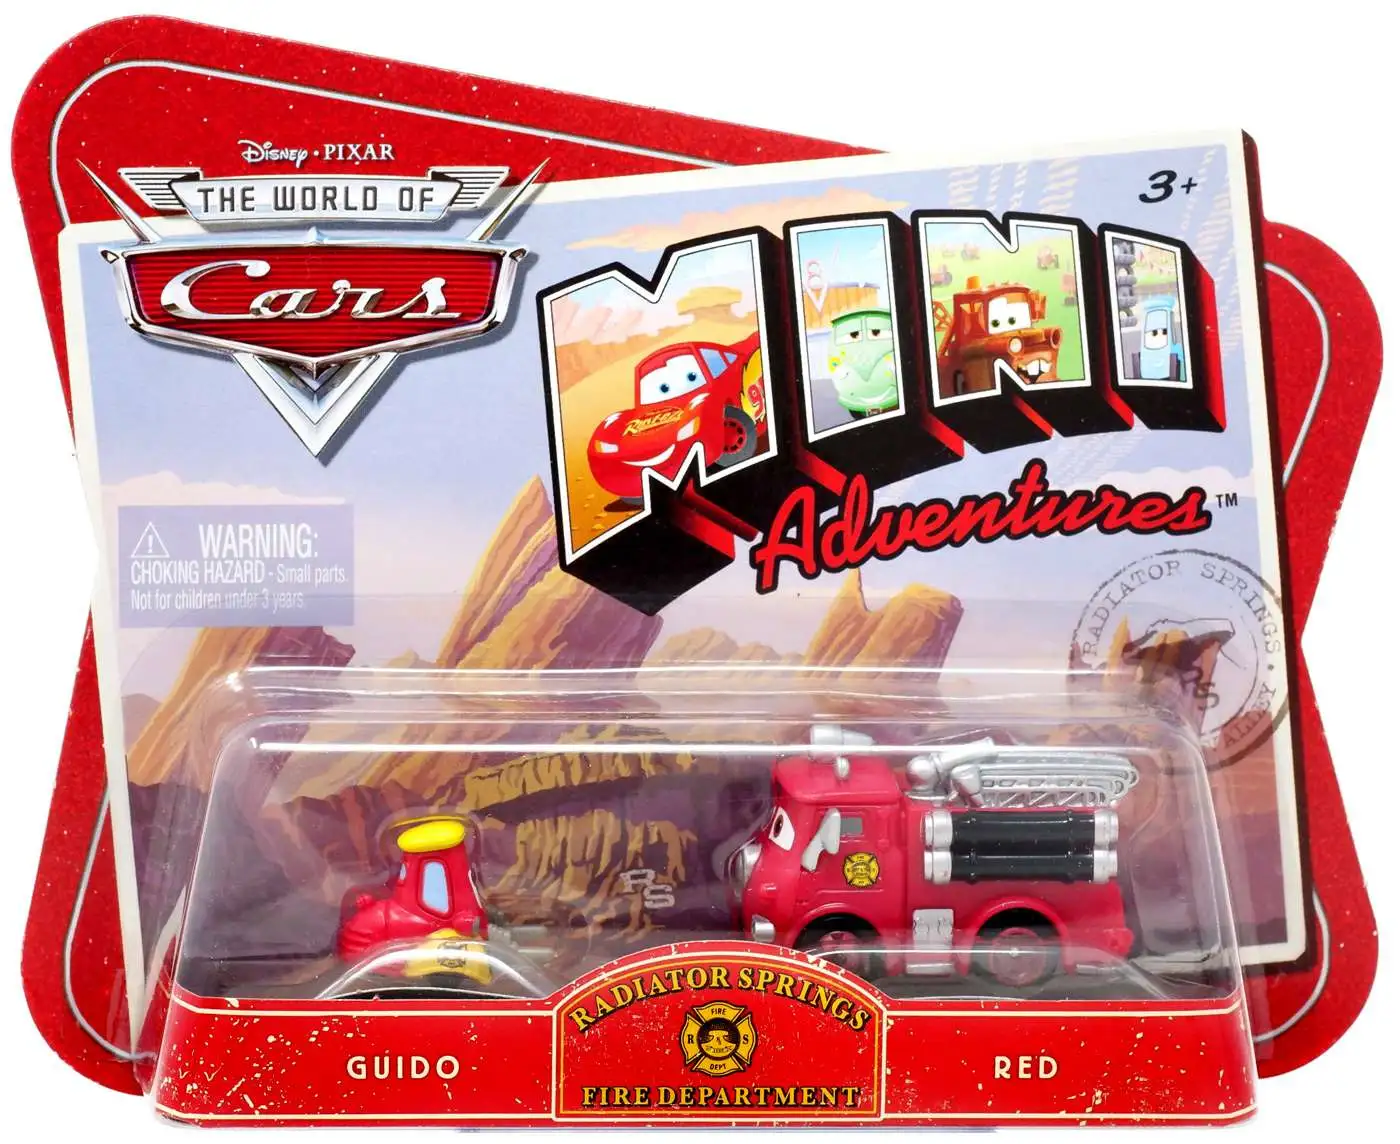 Disney Pixar Cars The World of Cars Mini Adventures Radiator Springs Fire  Department Plastic Car 2-Pack Guido Red Mattel Toys - ToyWiz